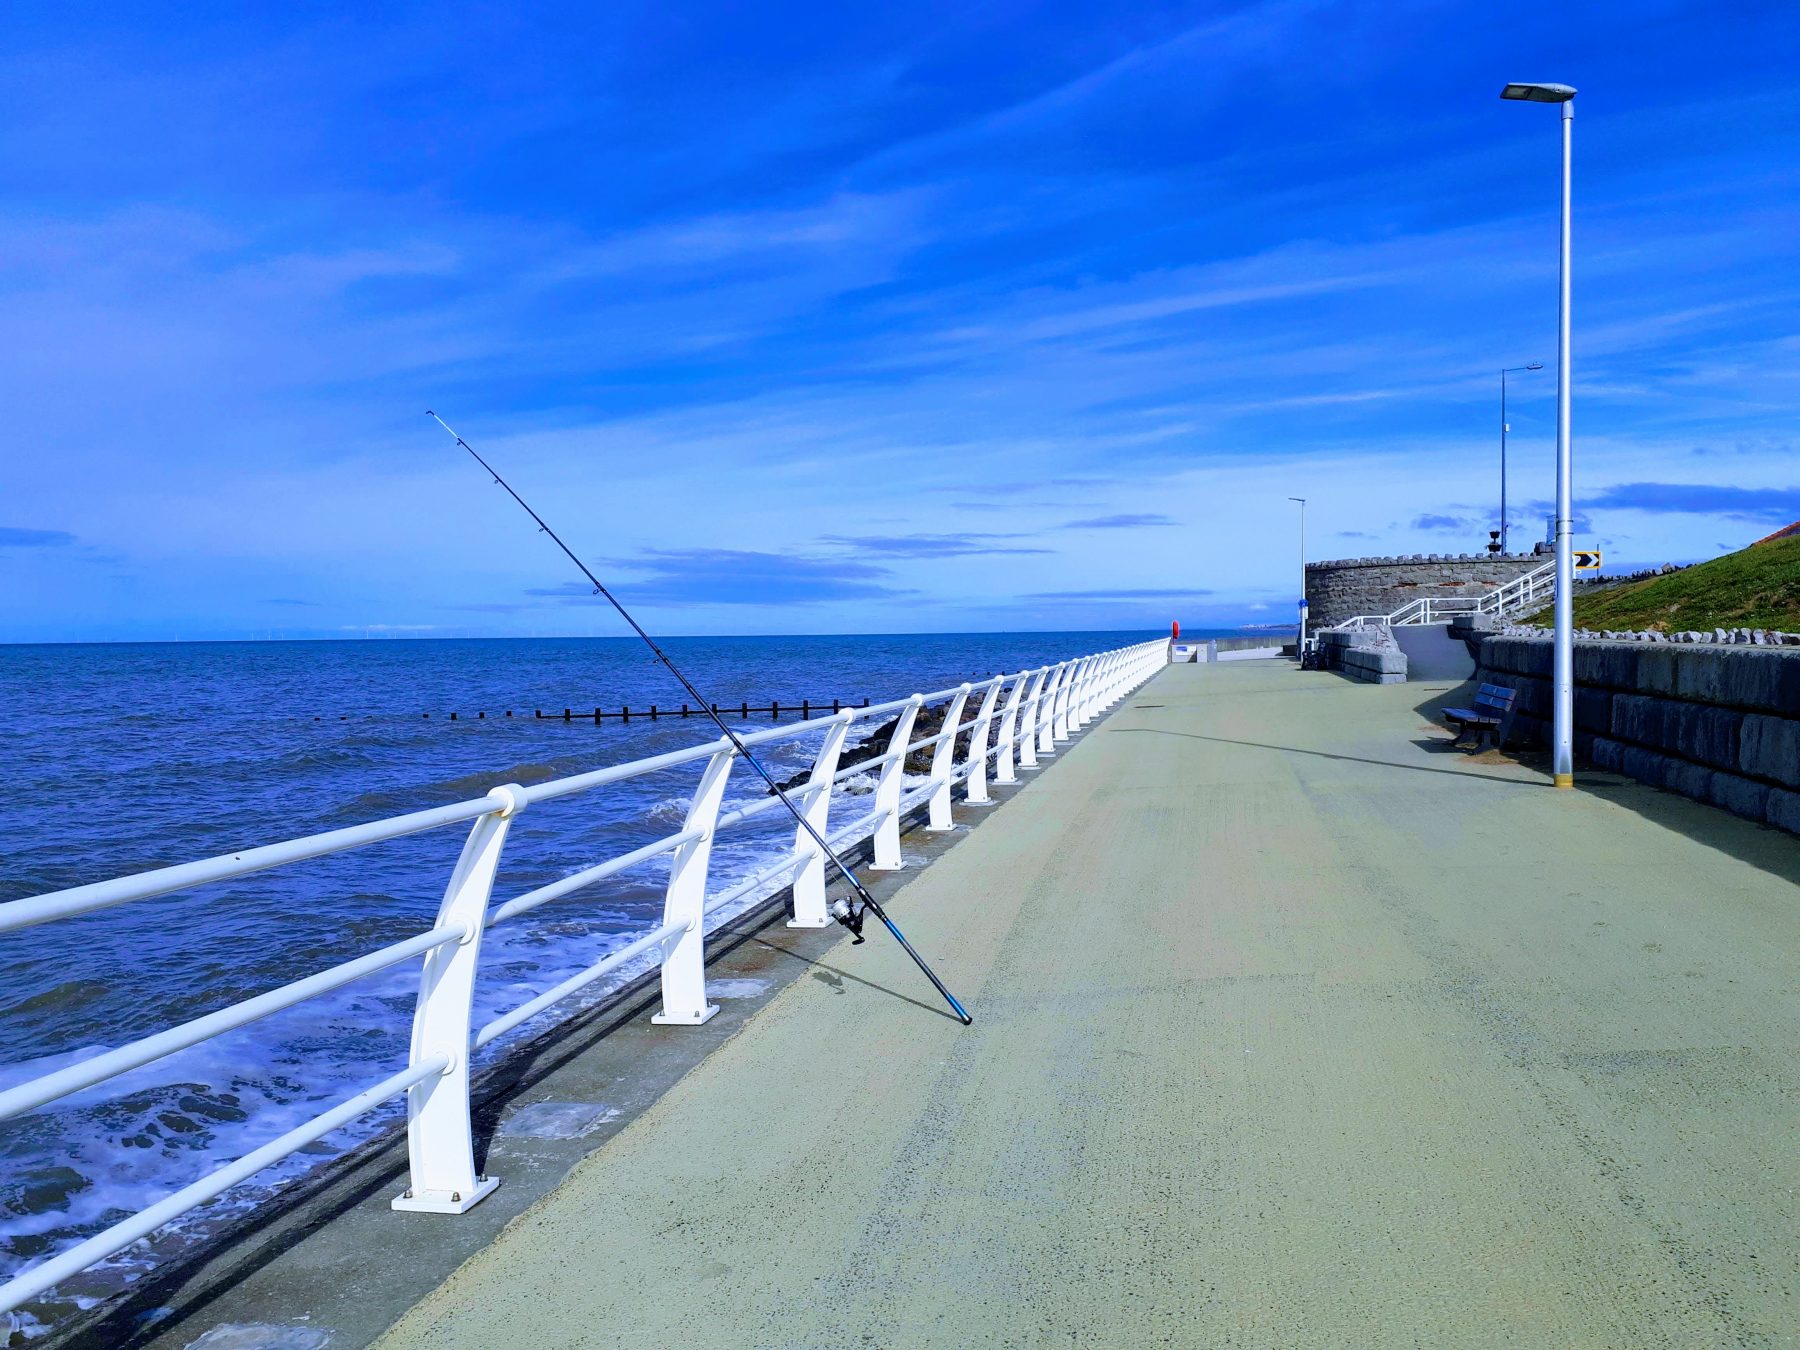 A picture of my fishing setup while fishing at Splash Point in Rhyl